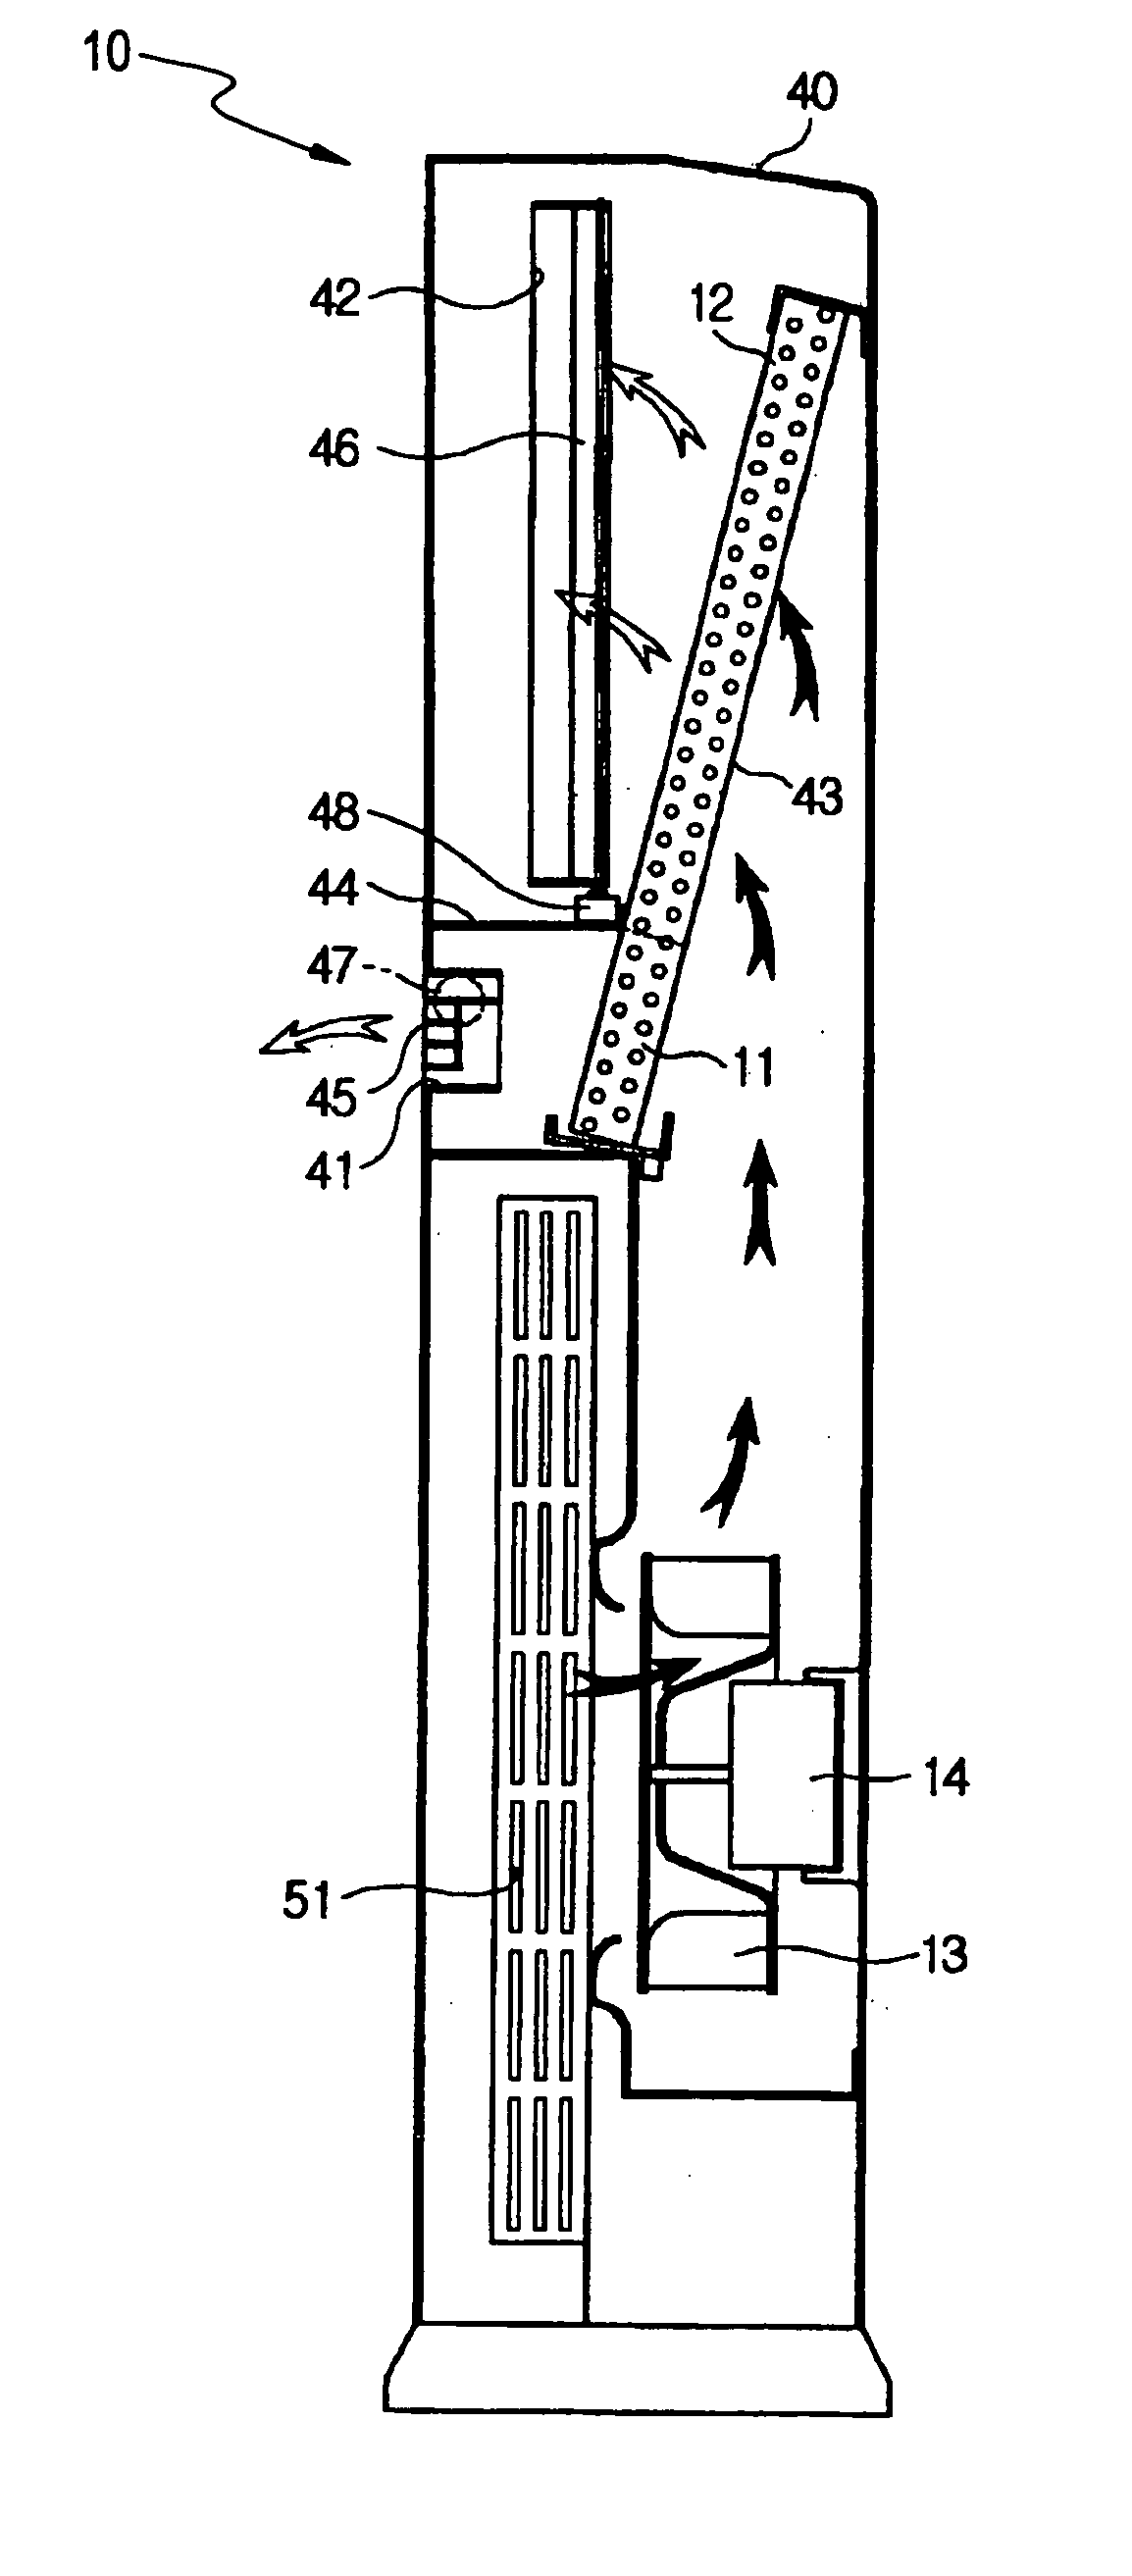 Multi-stage operation type air conditioner